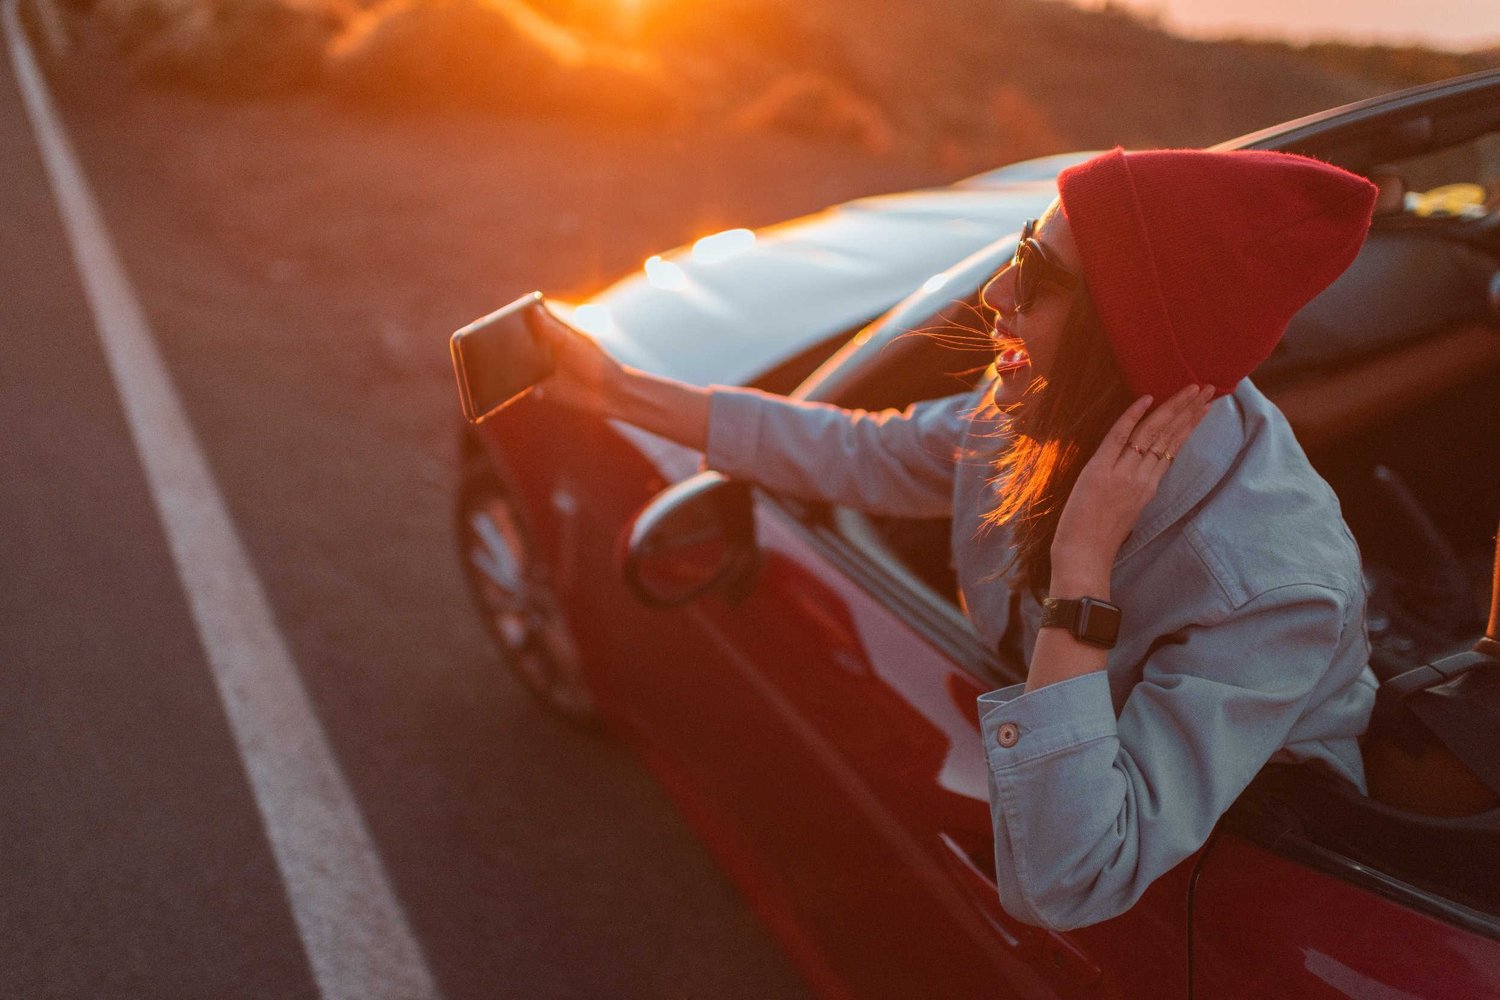 Influencer taking photo with car at sunset